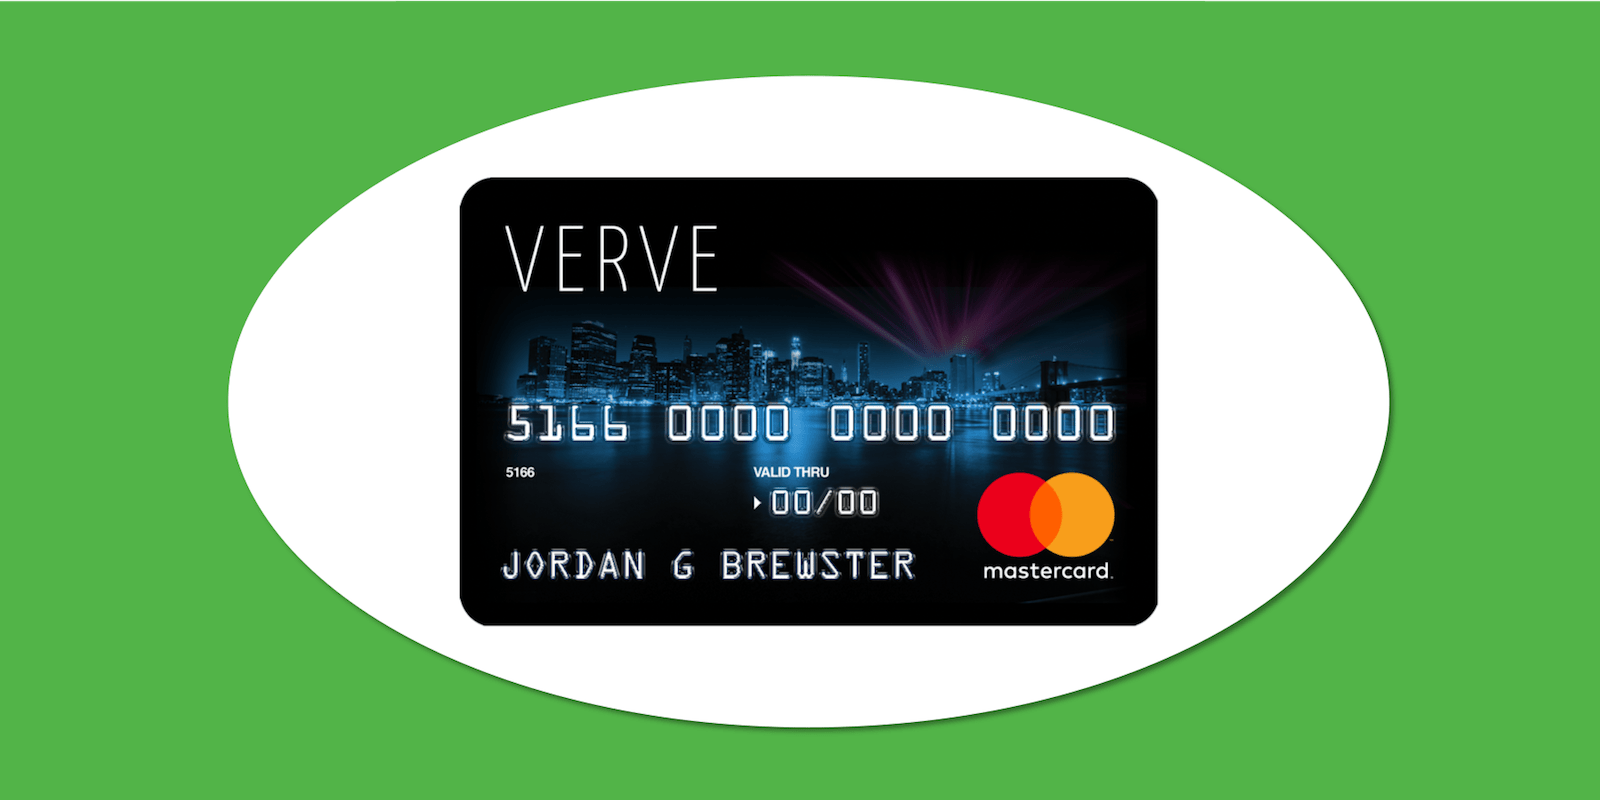 Verve Credit Card Review: A Credit Building Card - Just Start